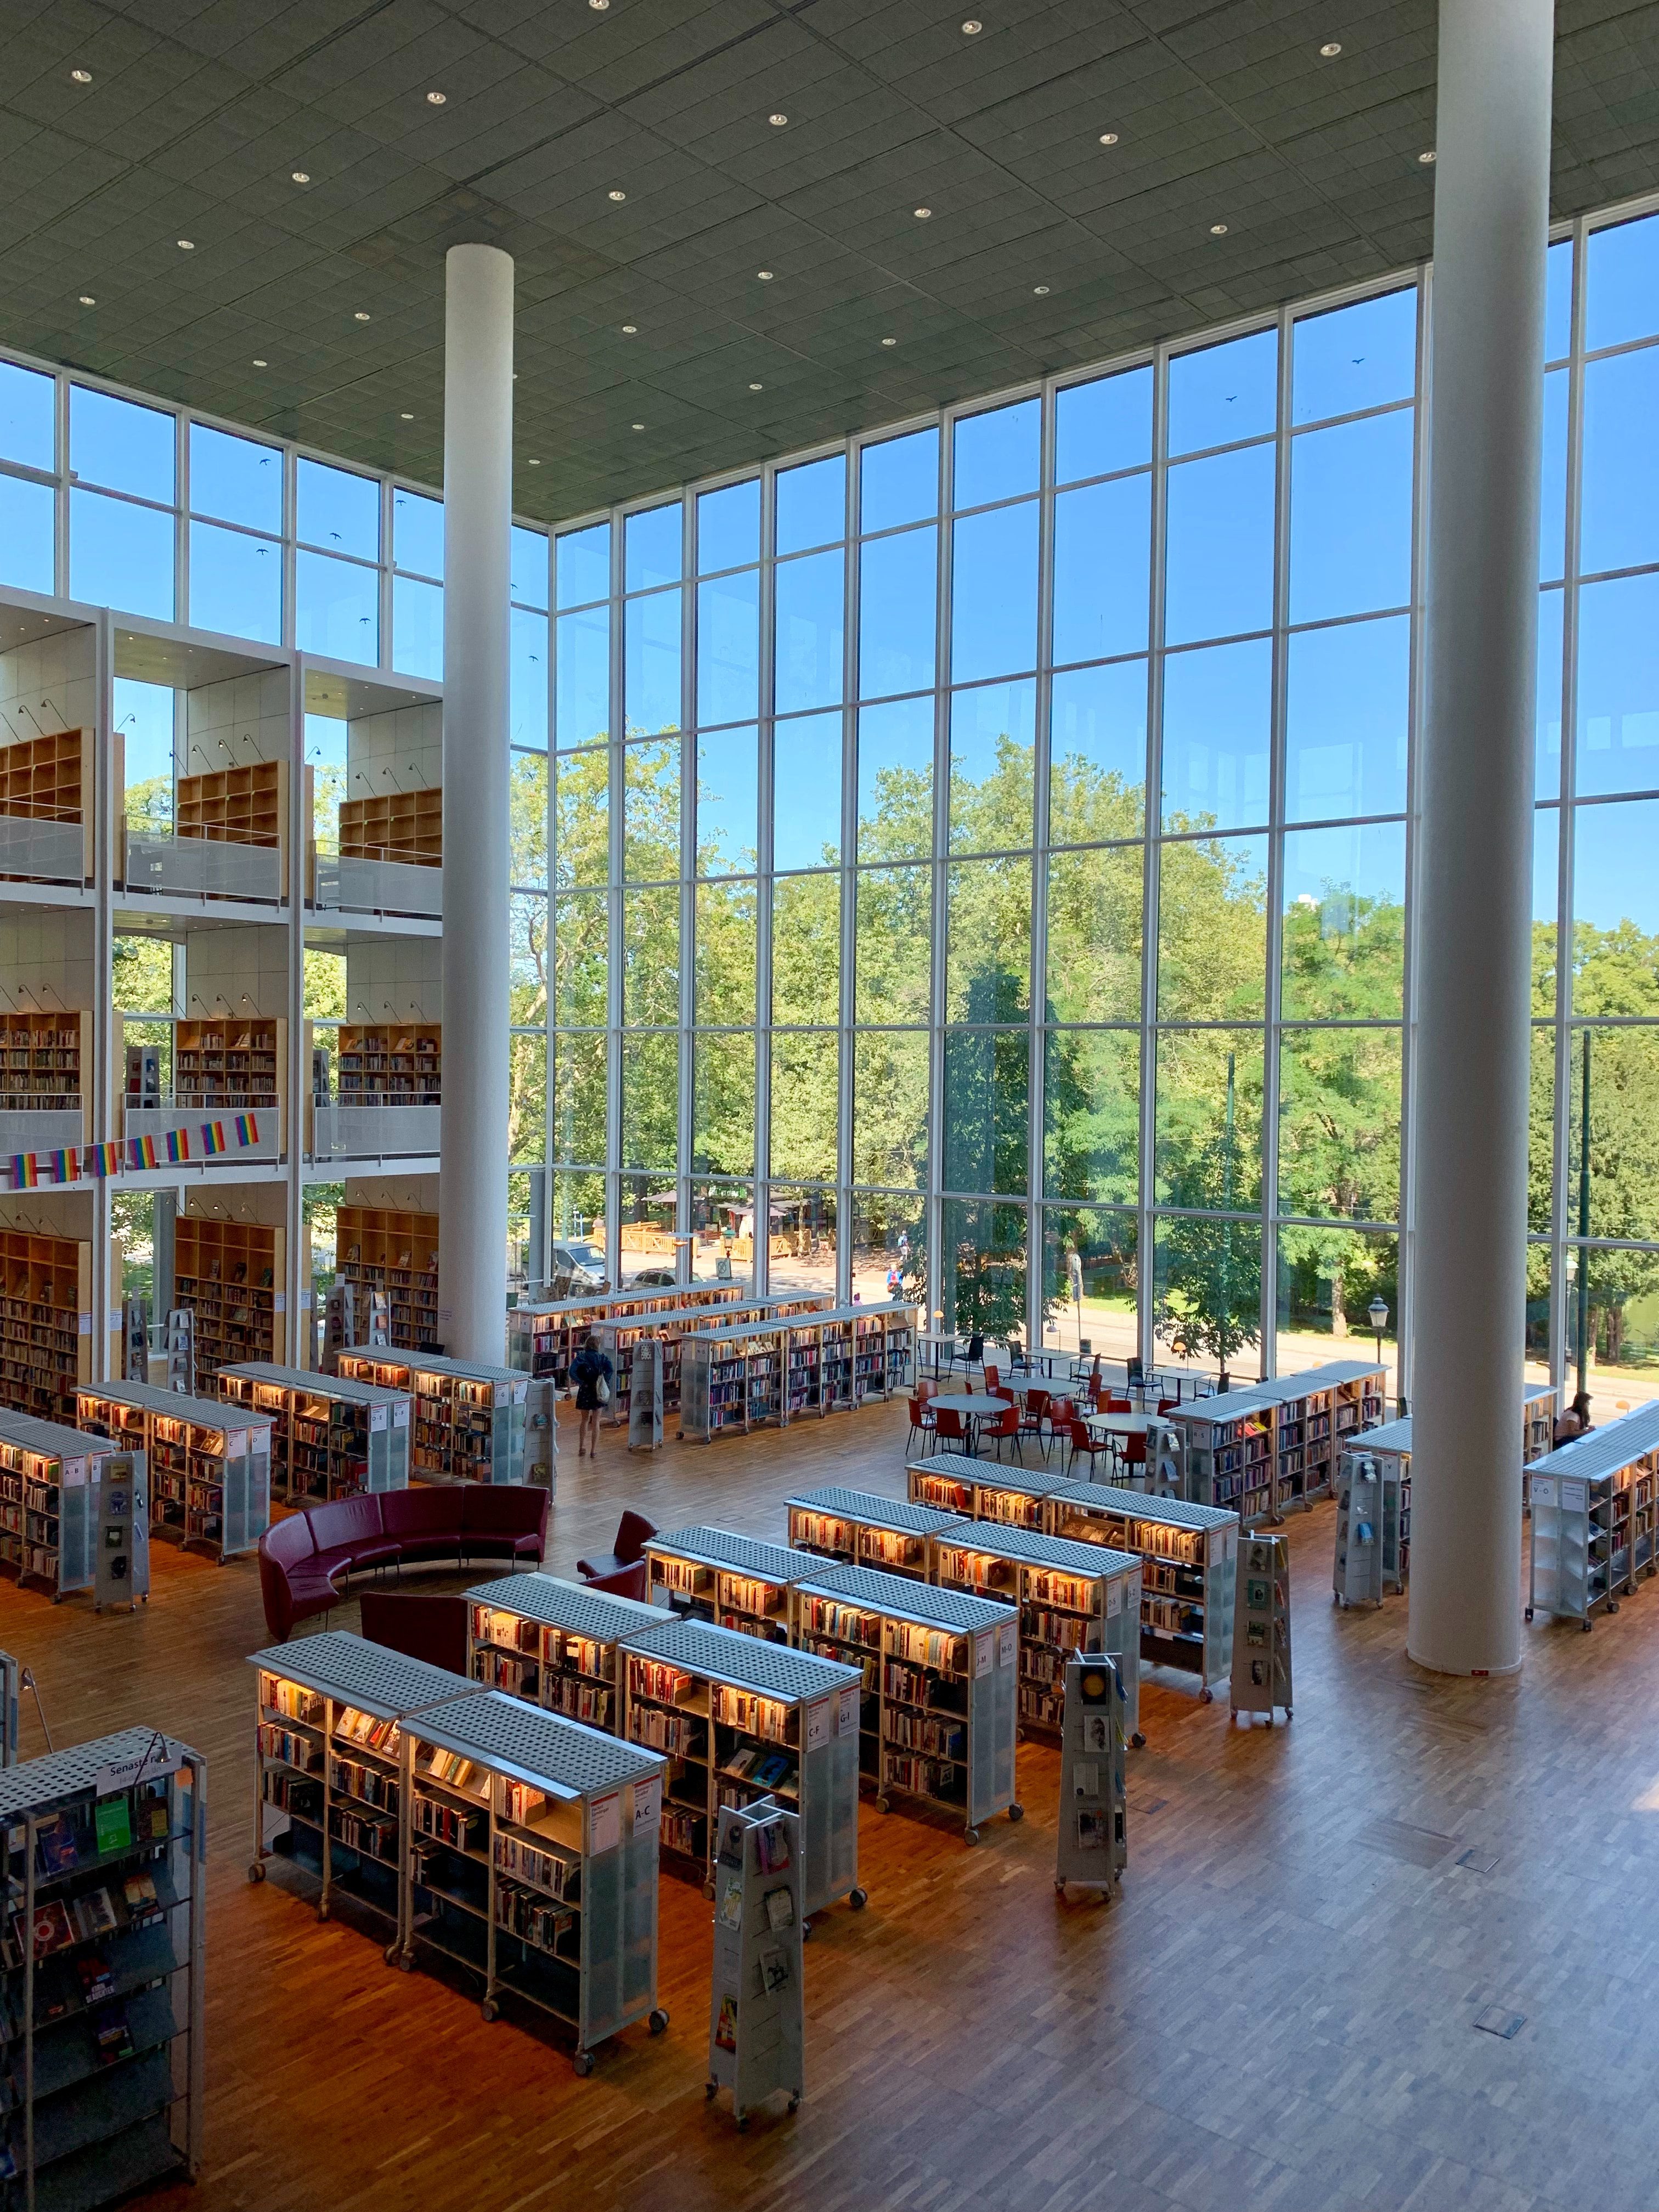 Library with big windows and green trees outside, shelves with books on inside